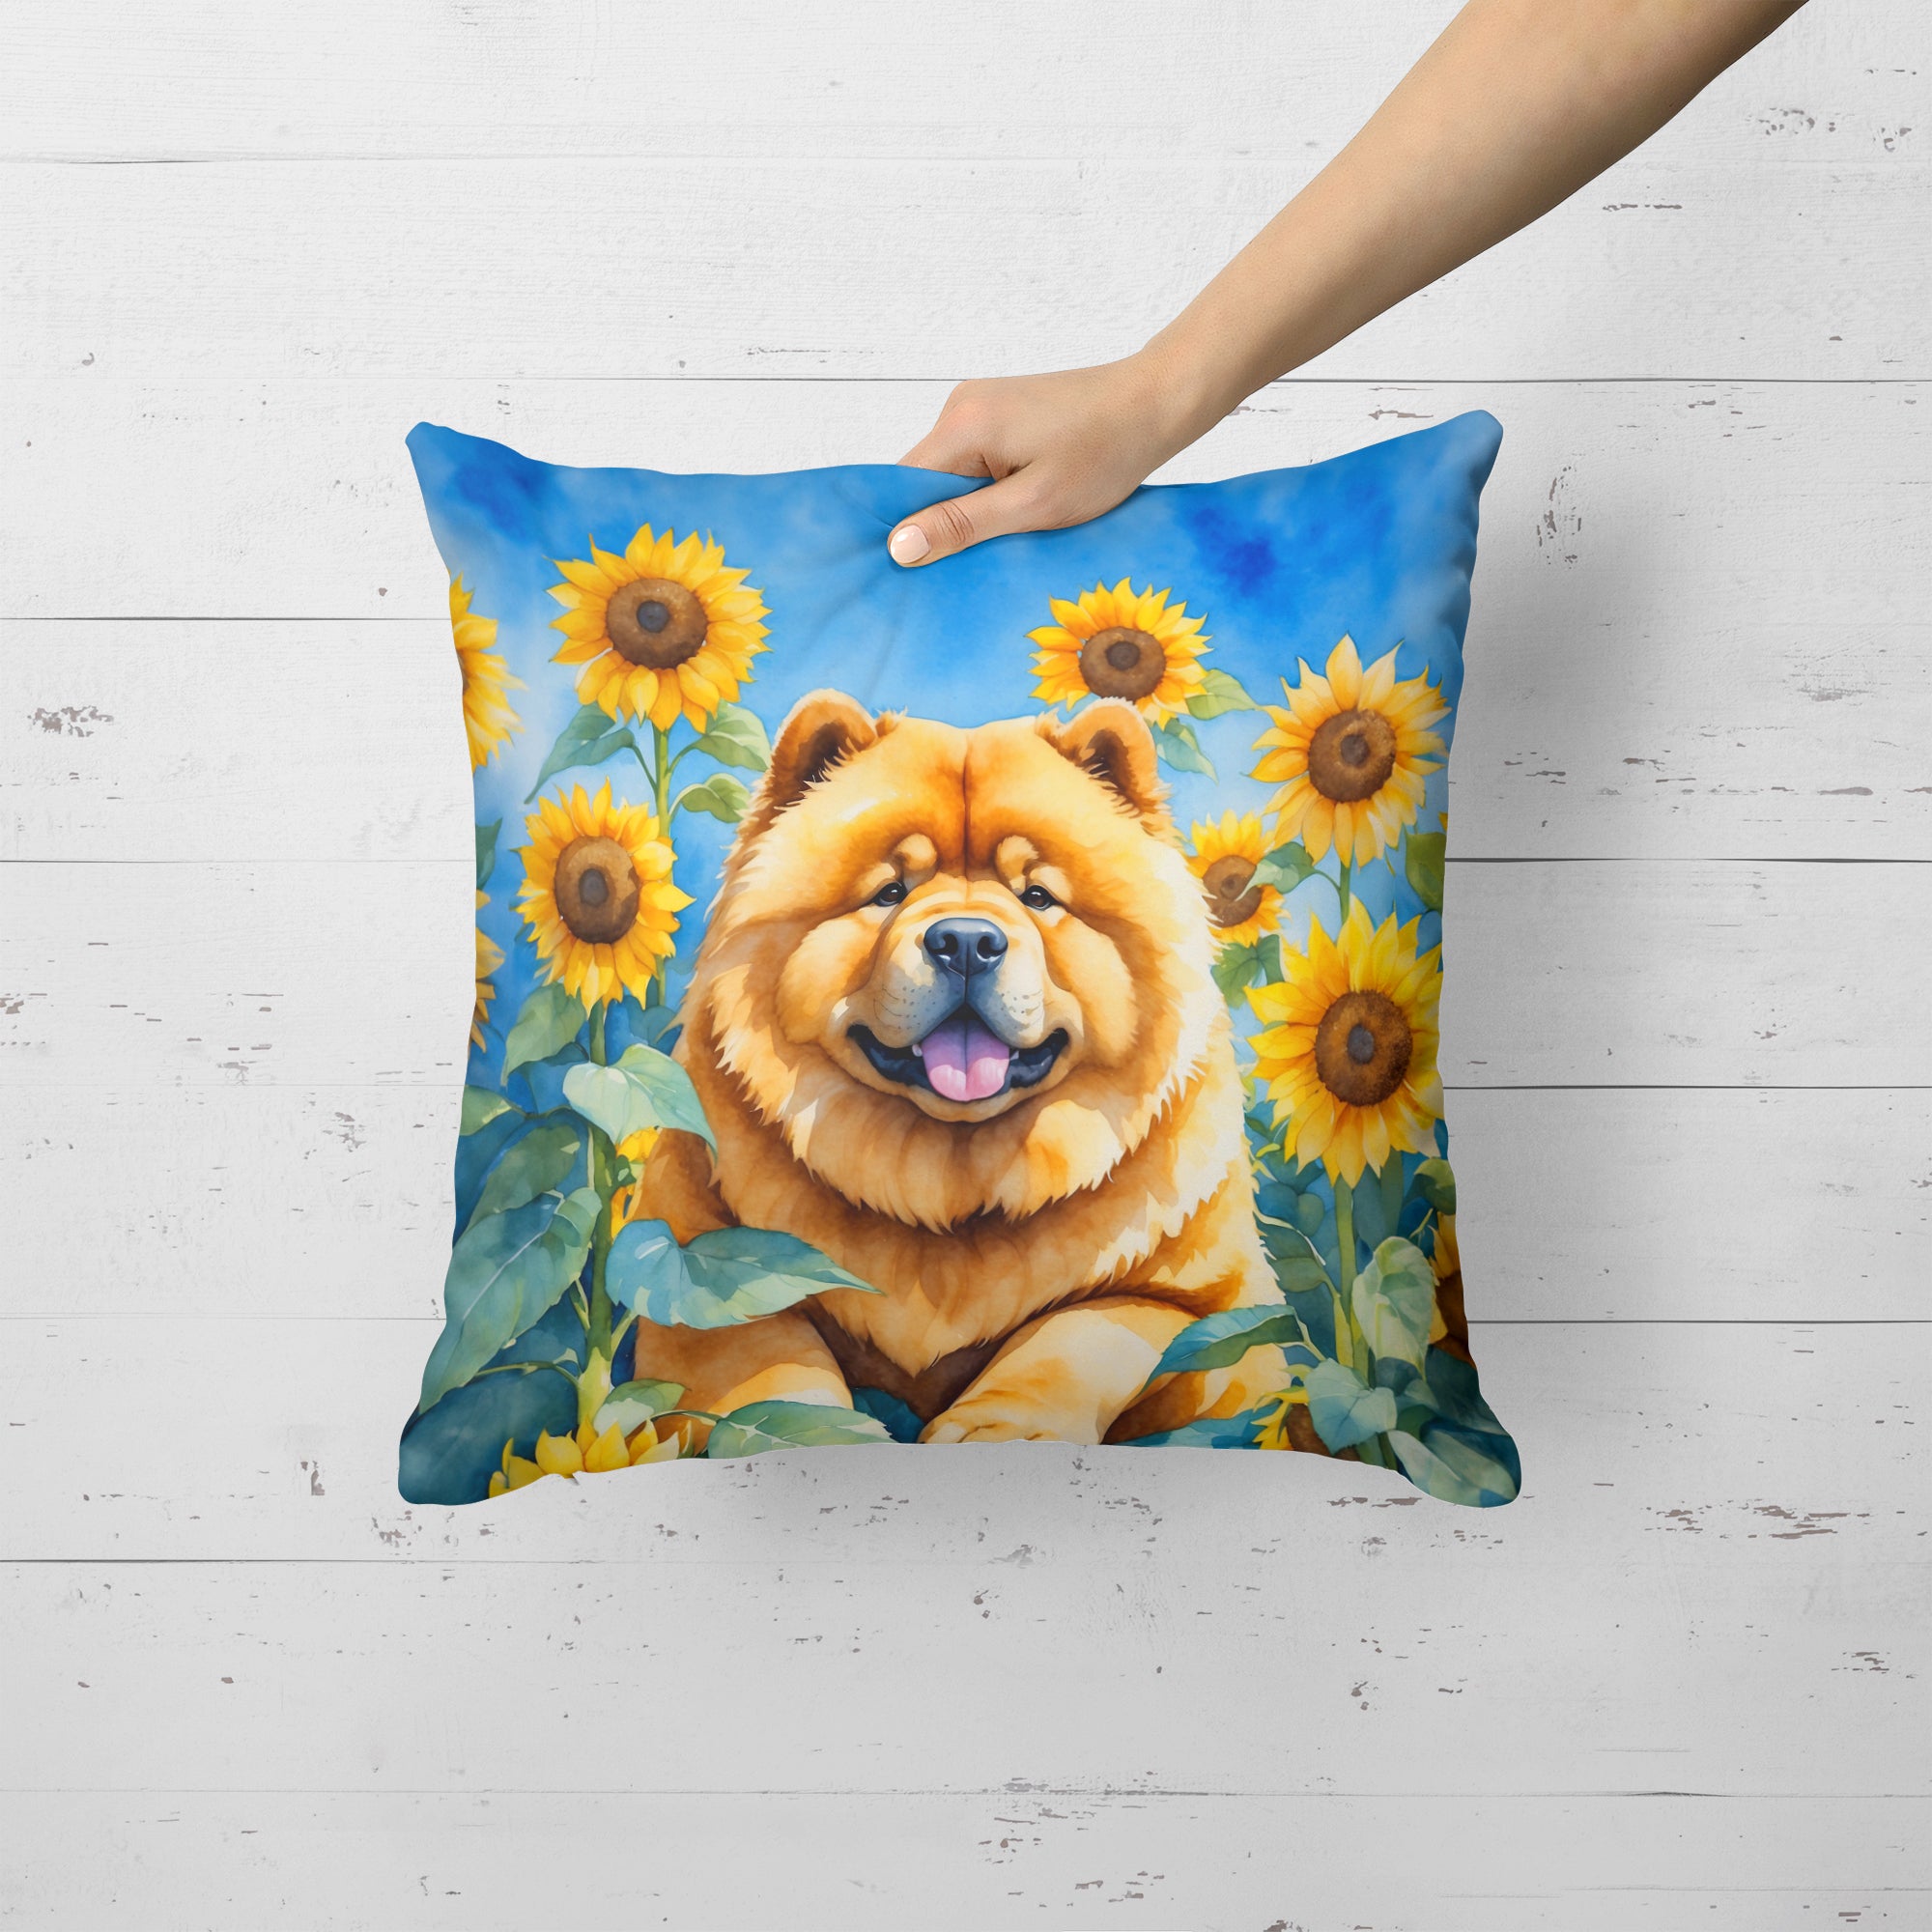 Buy this Chow Chow in Sunflowers Throw Pillow